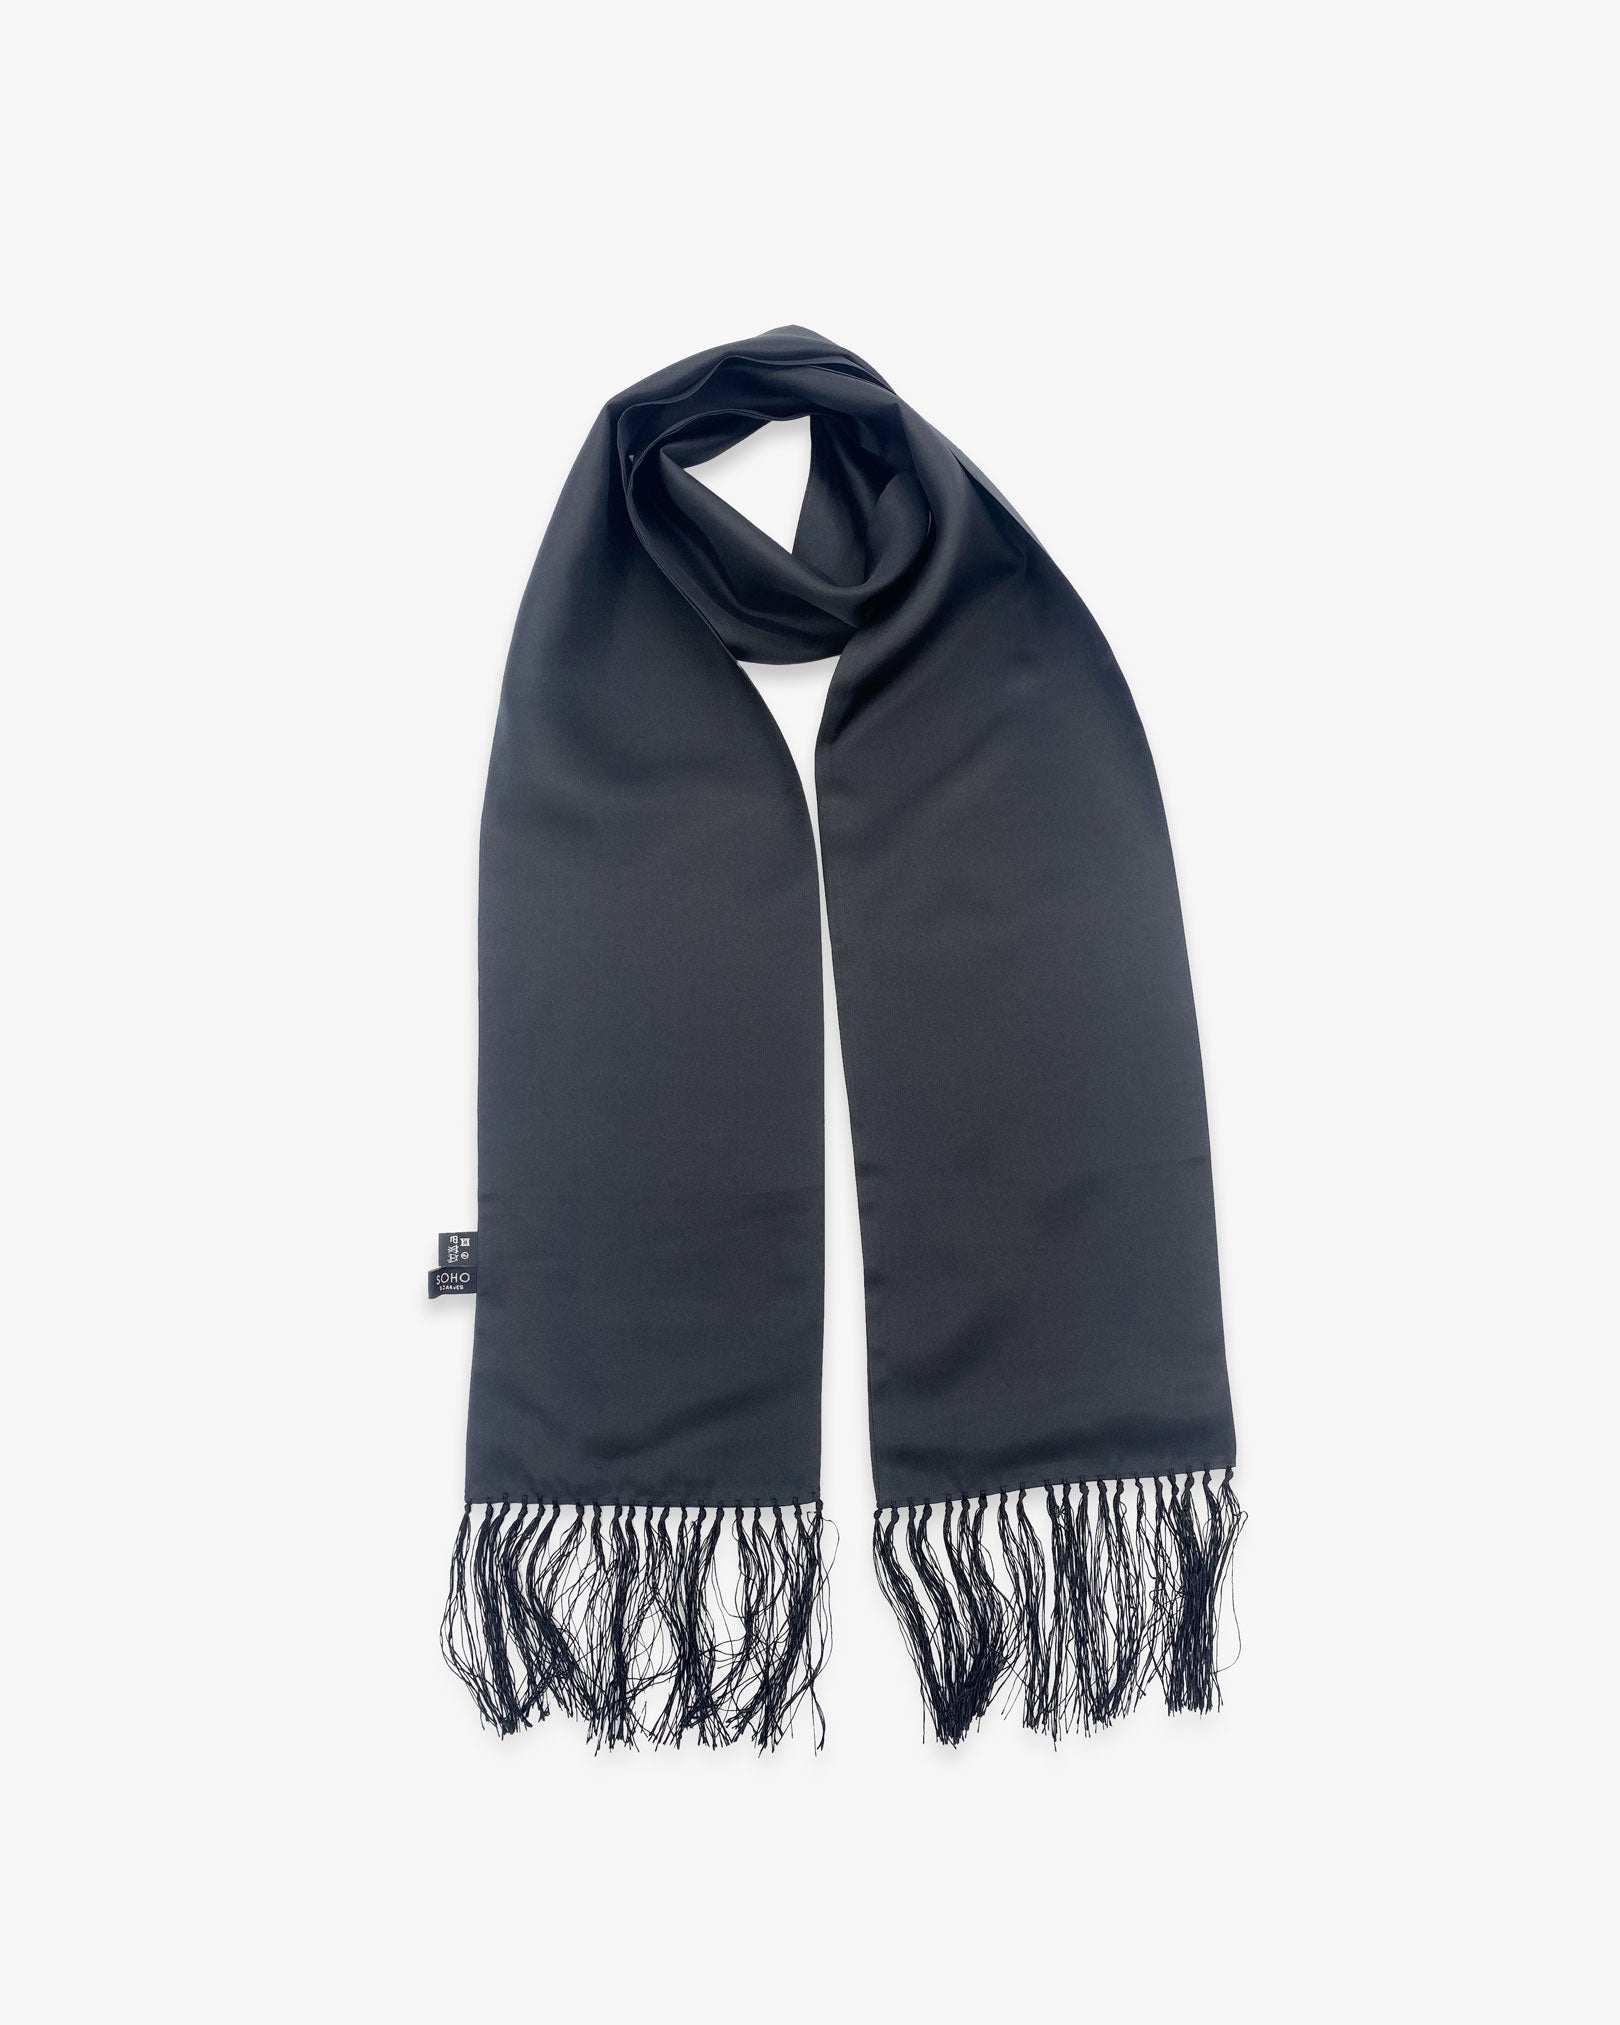 Looped view of the 'Air Black' silk aviator scarf, clearly showing the black scarf and matching 3-inch fringe.